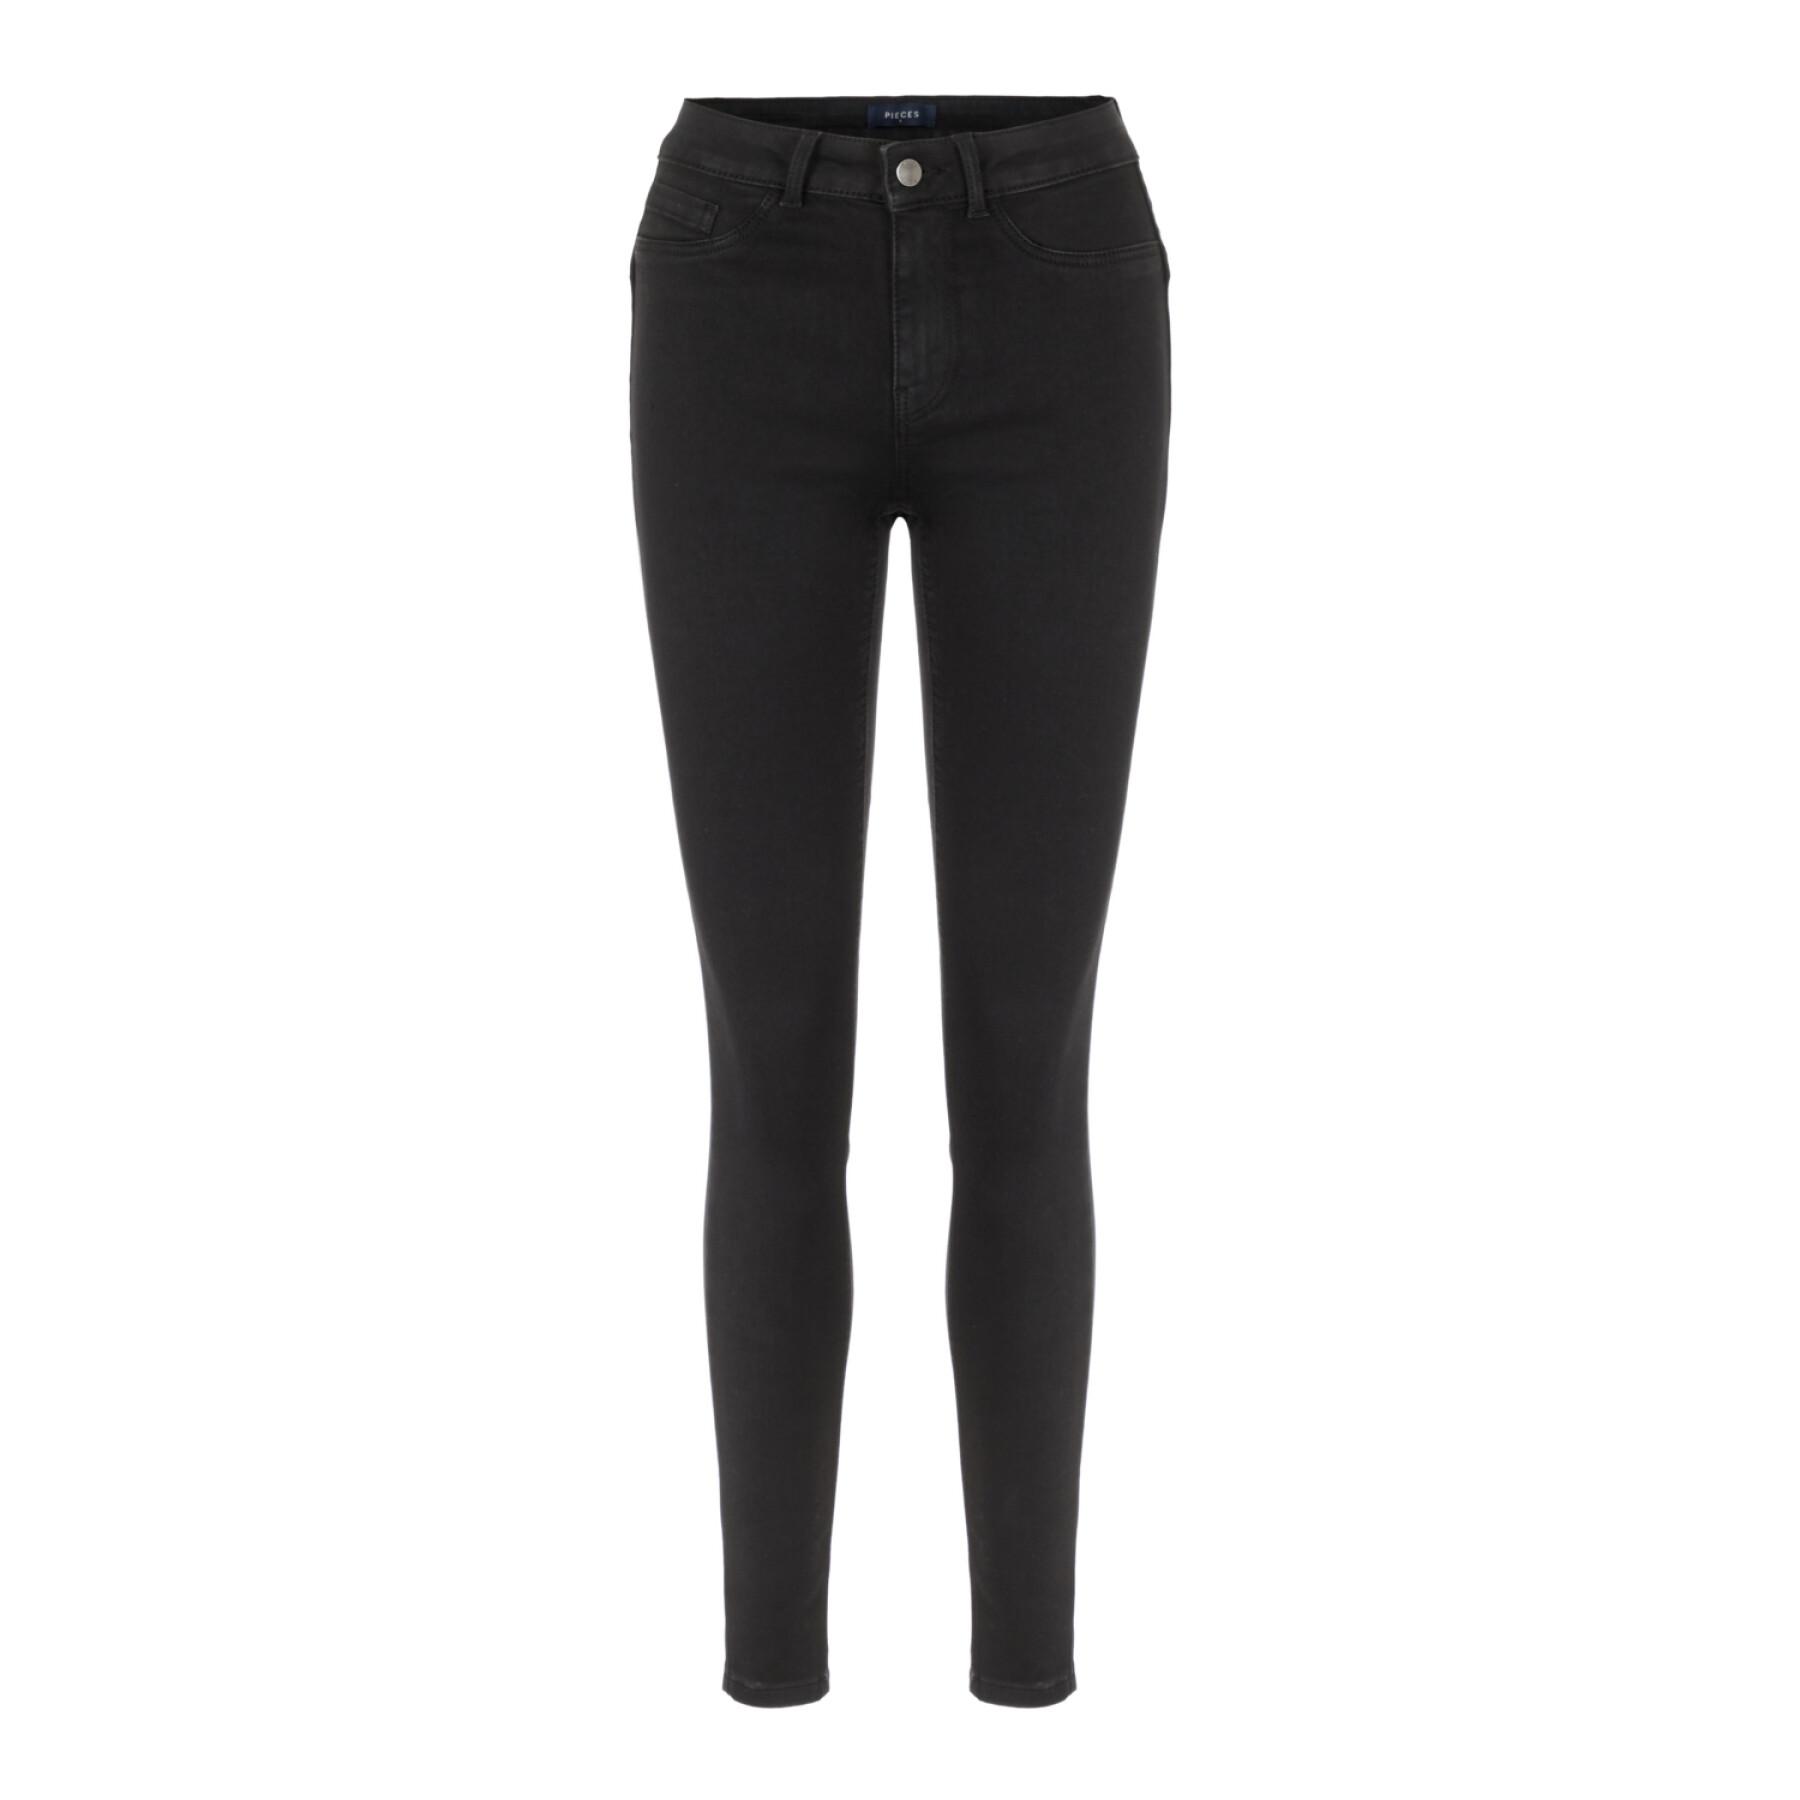 Women's tight sage jegging Pieces